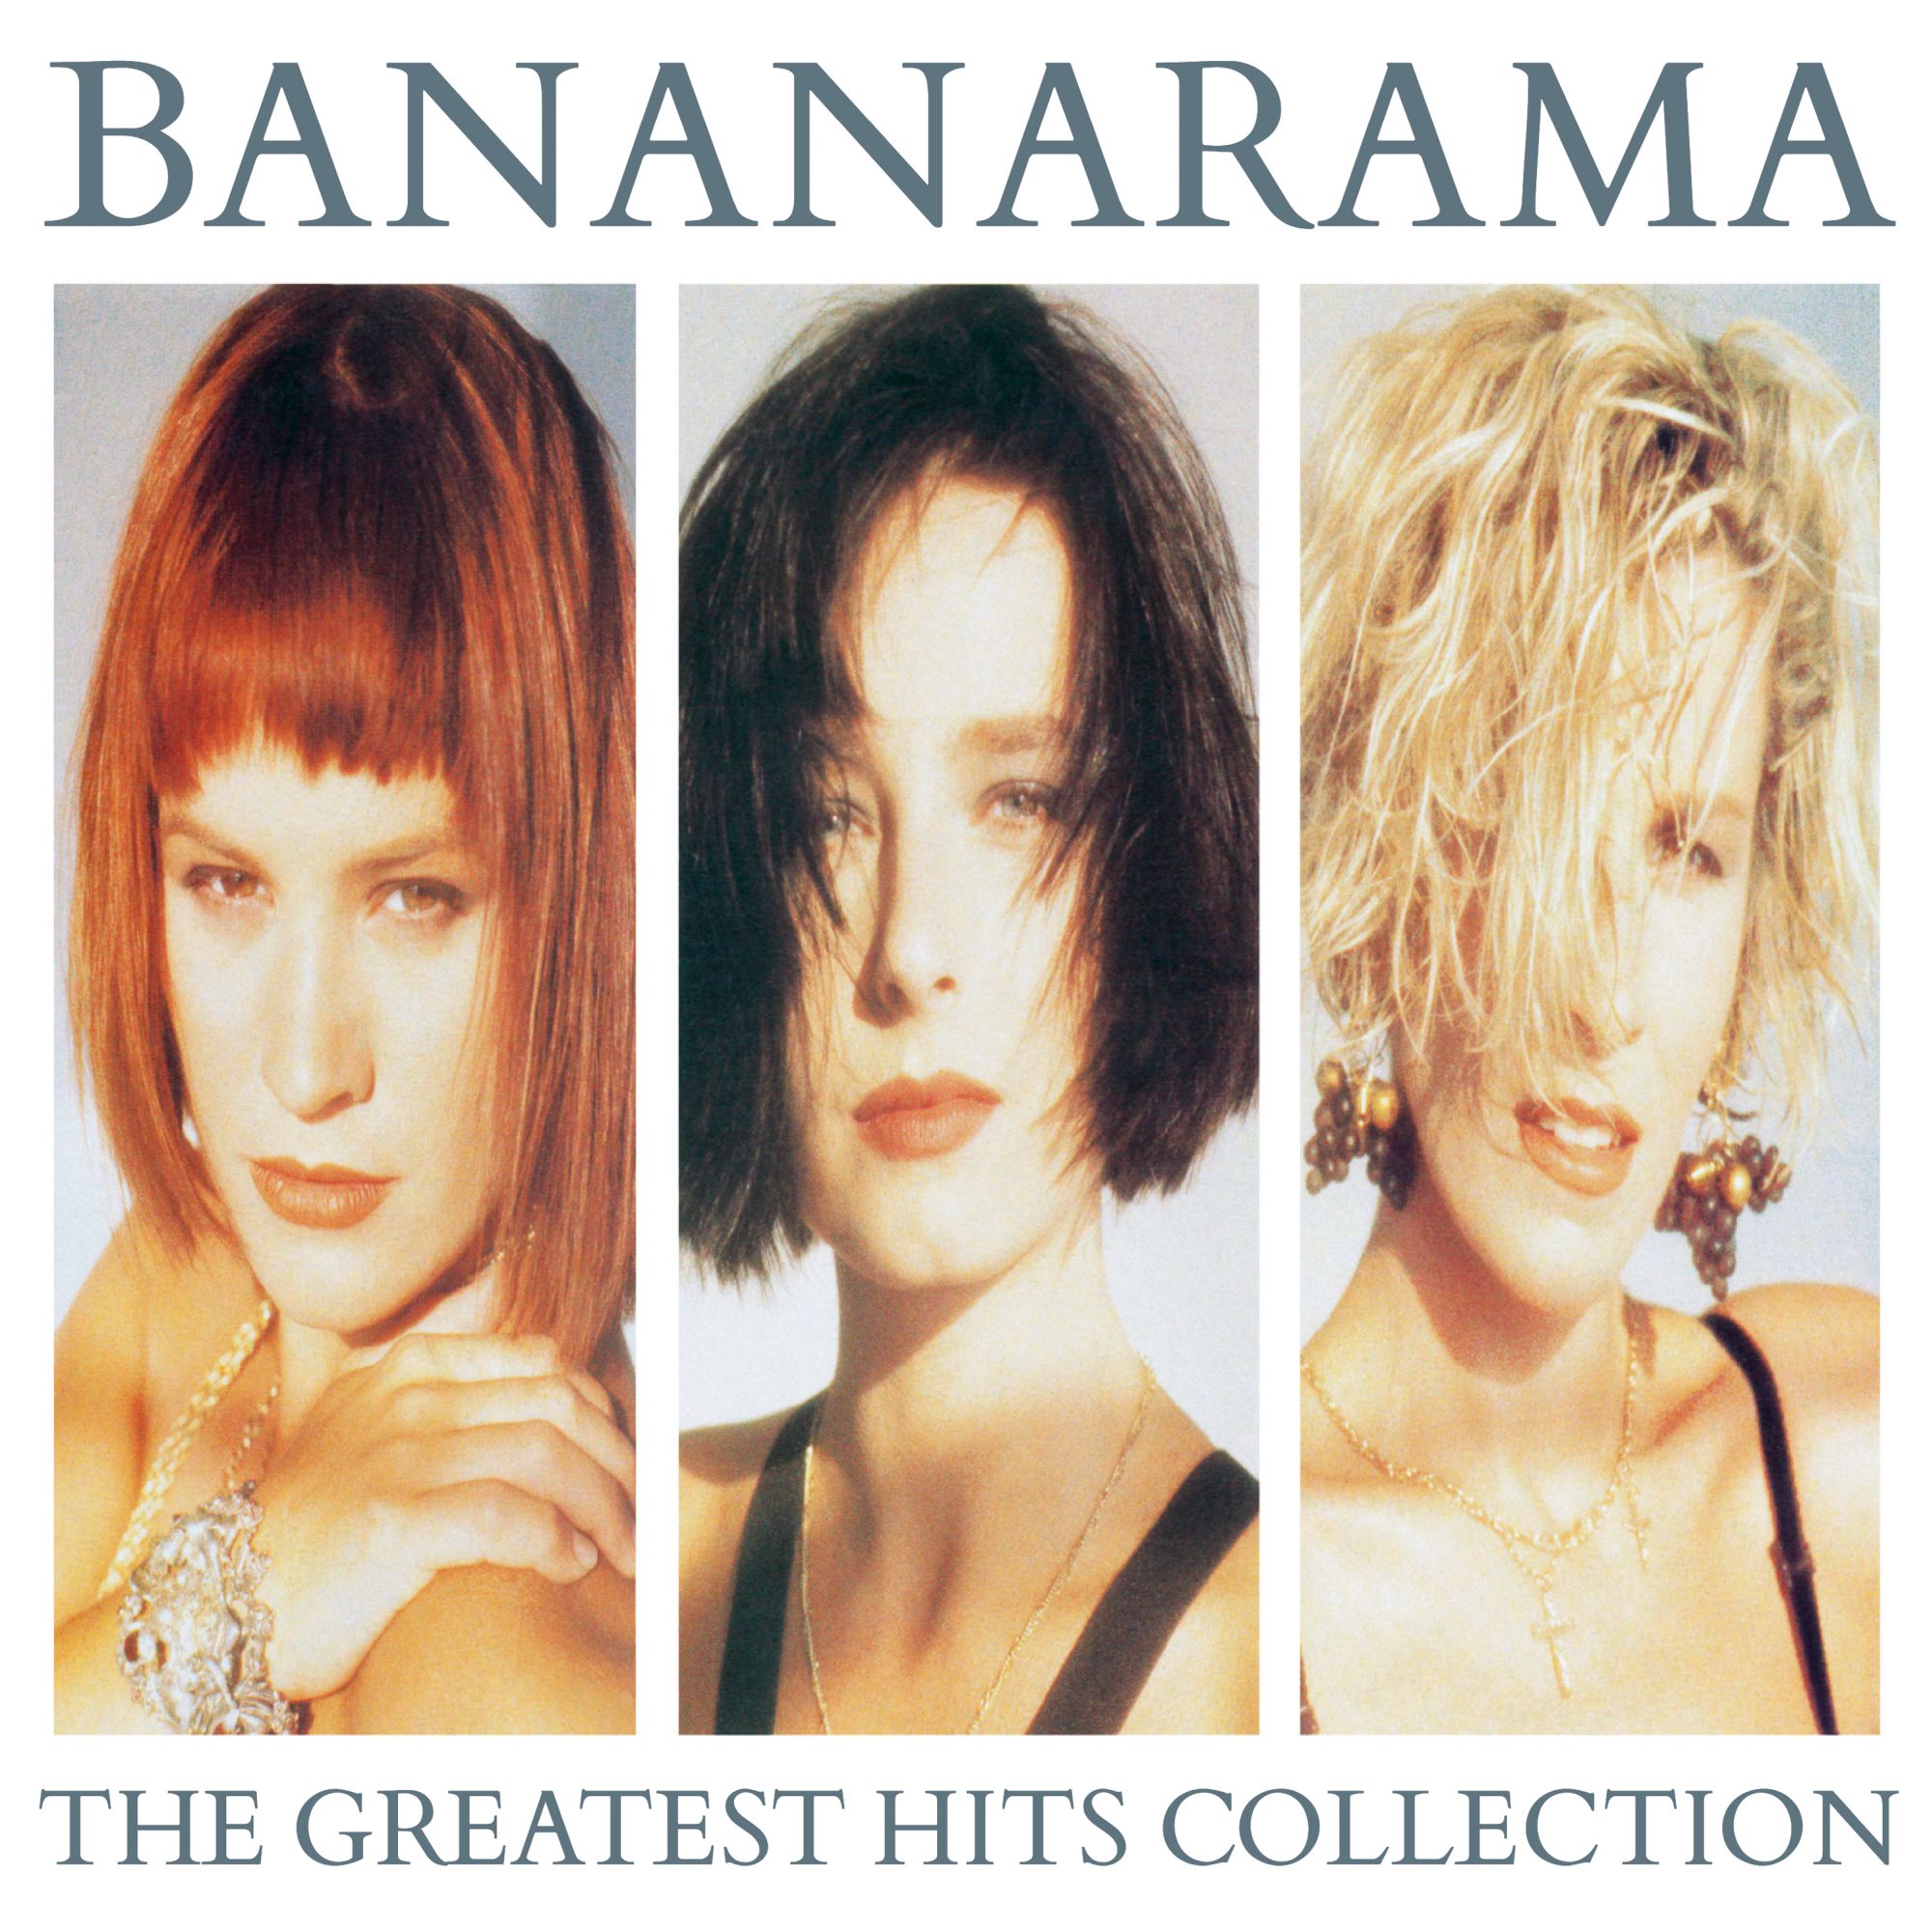 Bananarama - The Greatest Hits Collection (2017 Collector’s 2CD Edition)